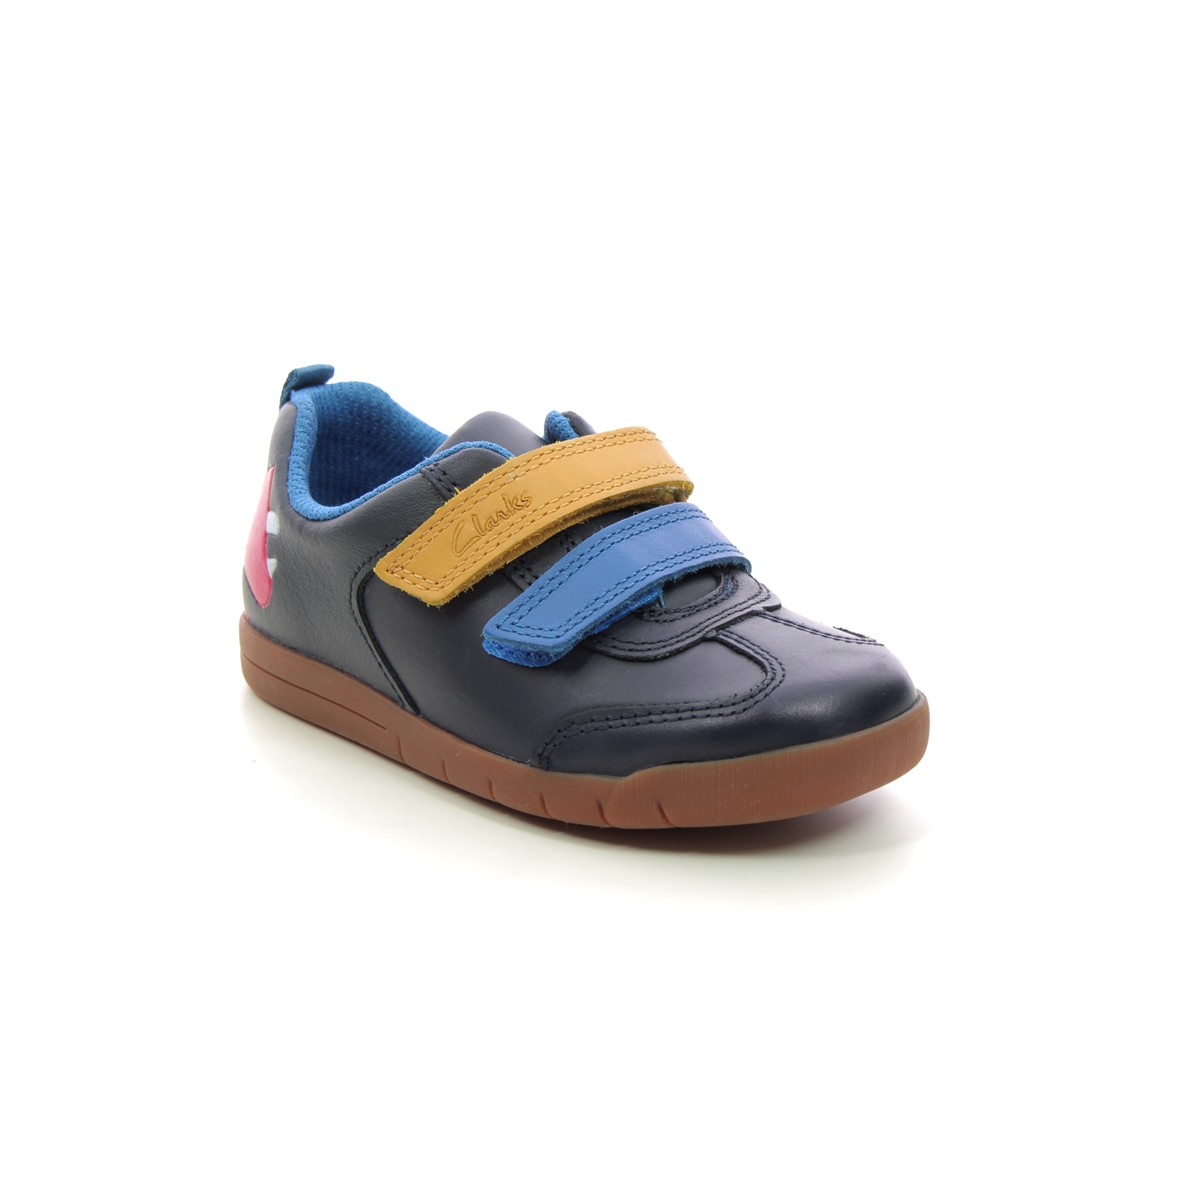 Clarks Den Play T Navy Leather Kids Boys Toddler Shoes 715906F In Size 4.5 In Plain Navy Leather F Width Fitting Regular Fit For kids